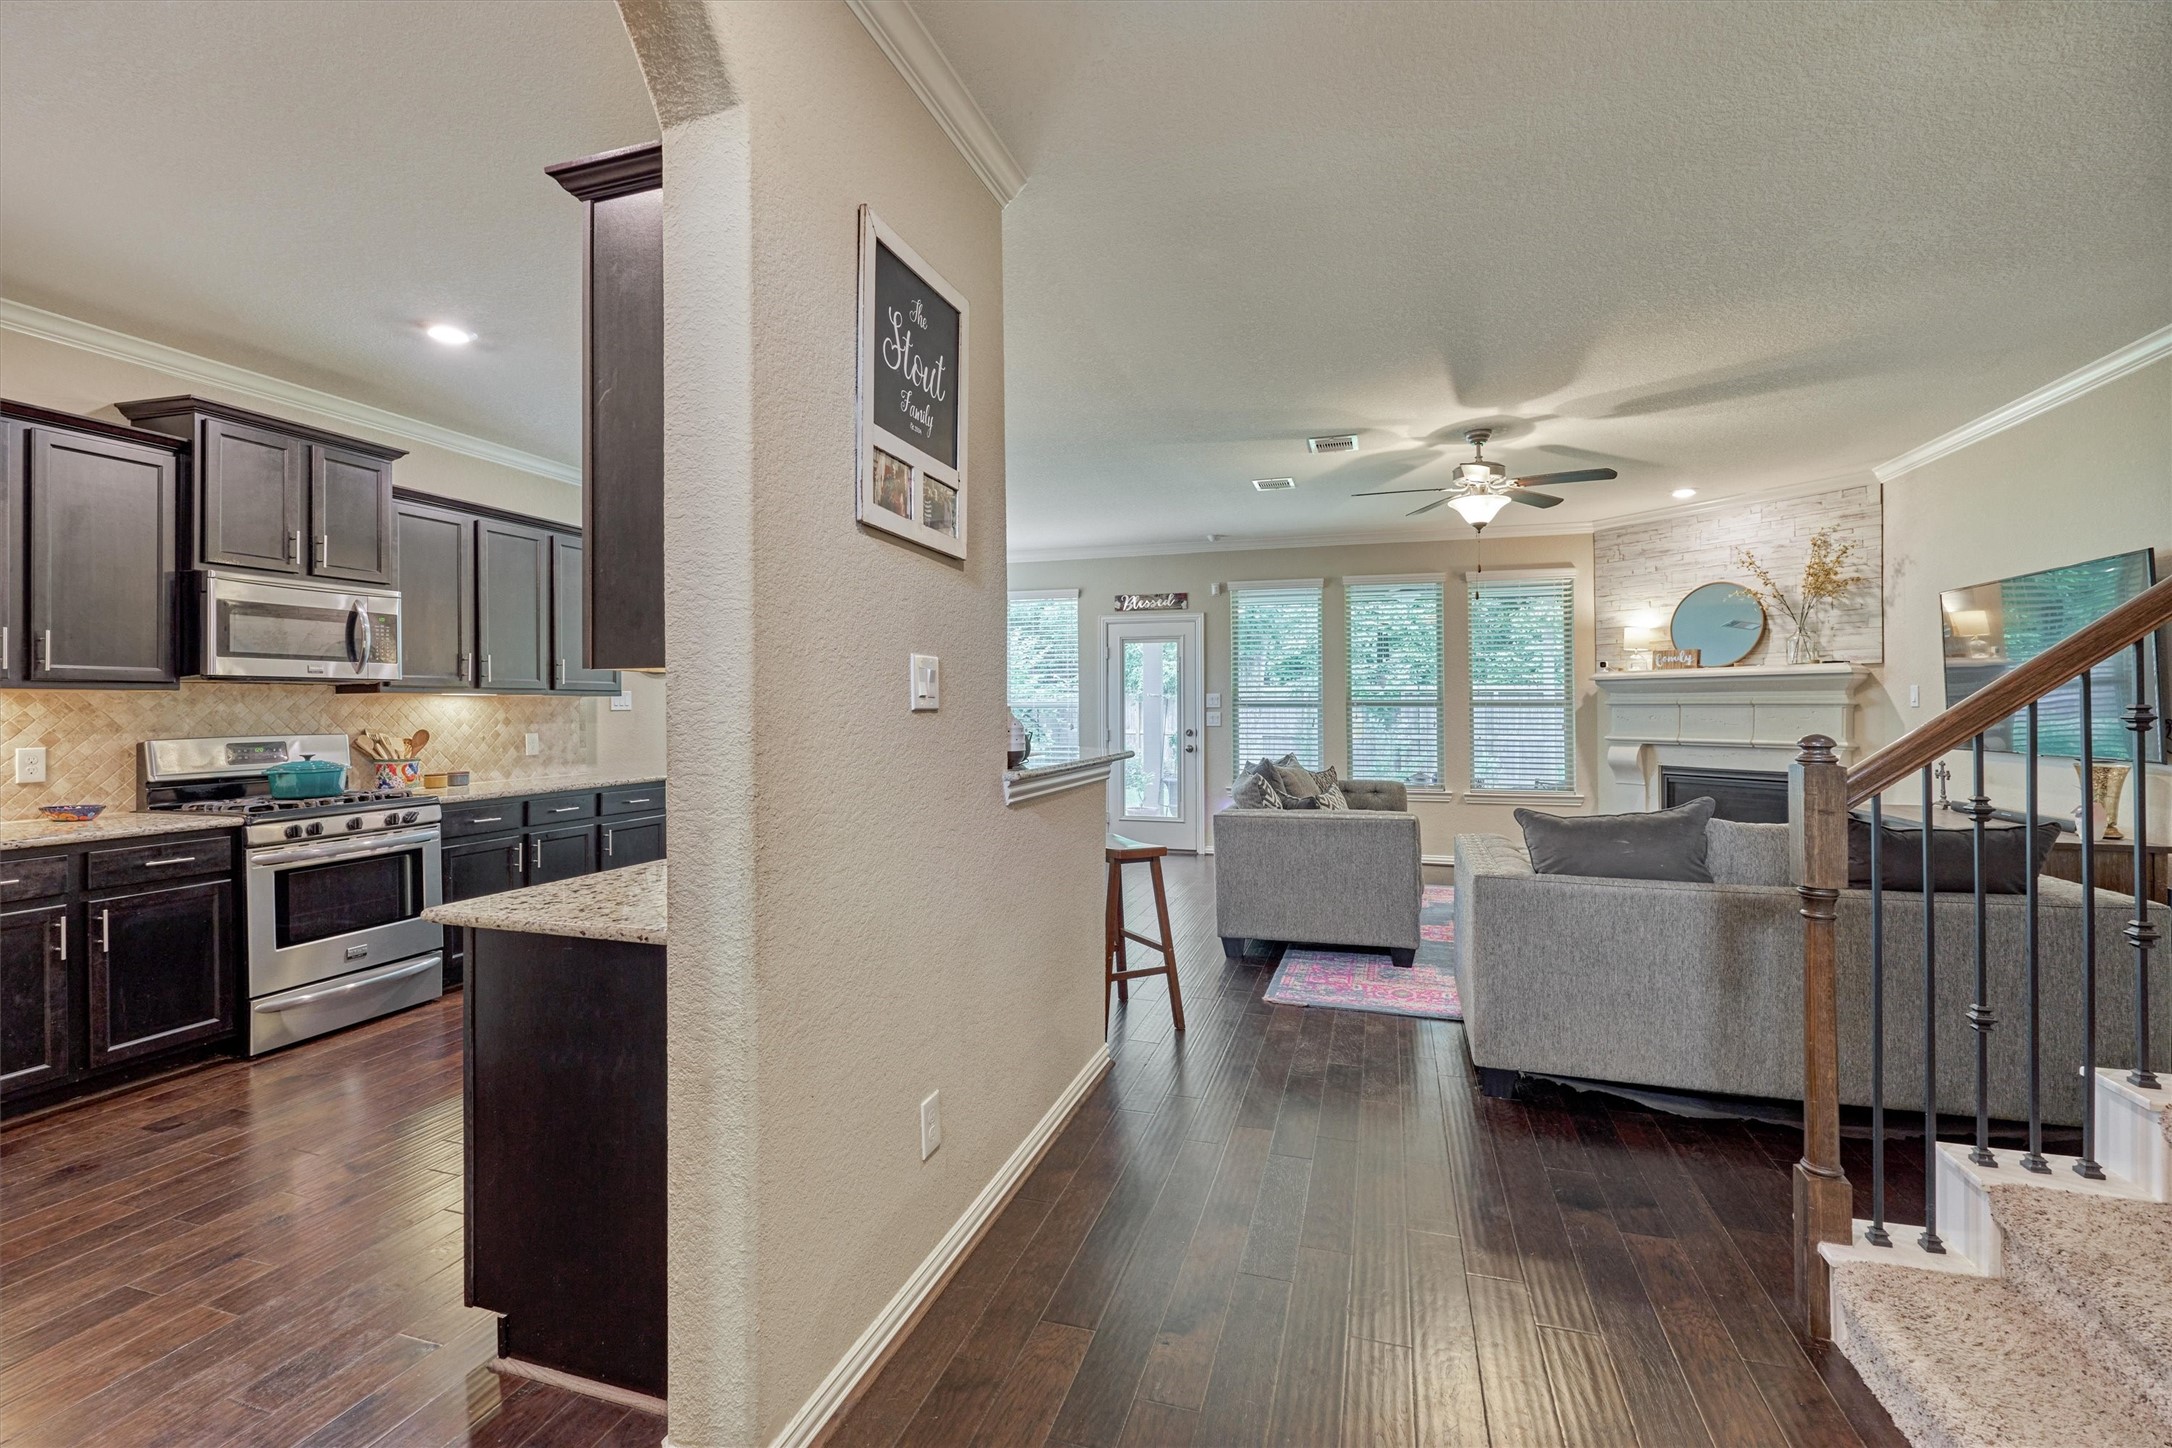 The living room connects to the dining room and kitchen giving this home a very open feel.